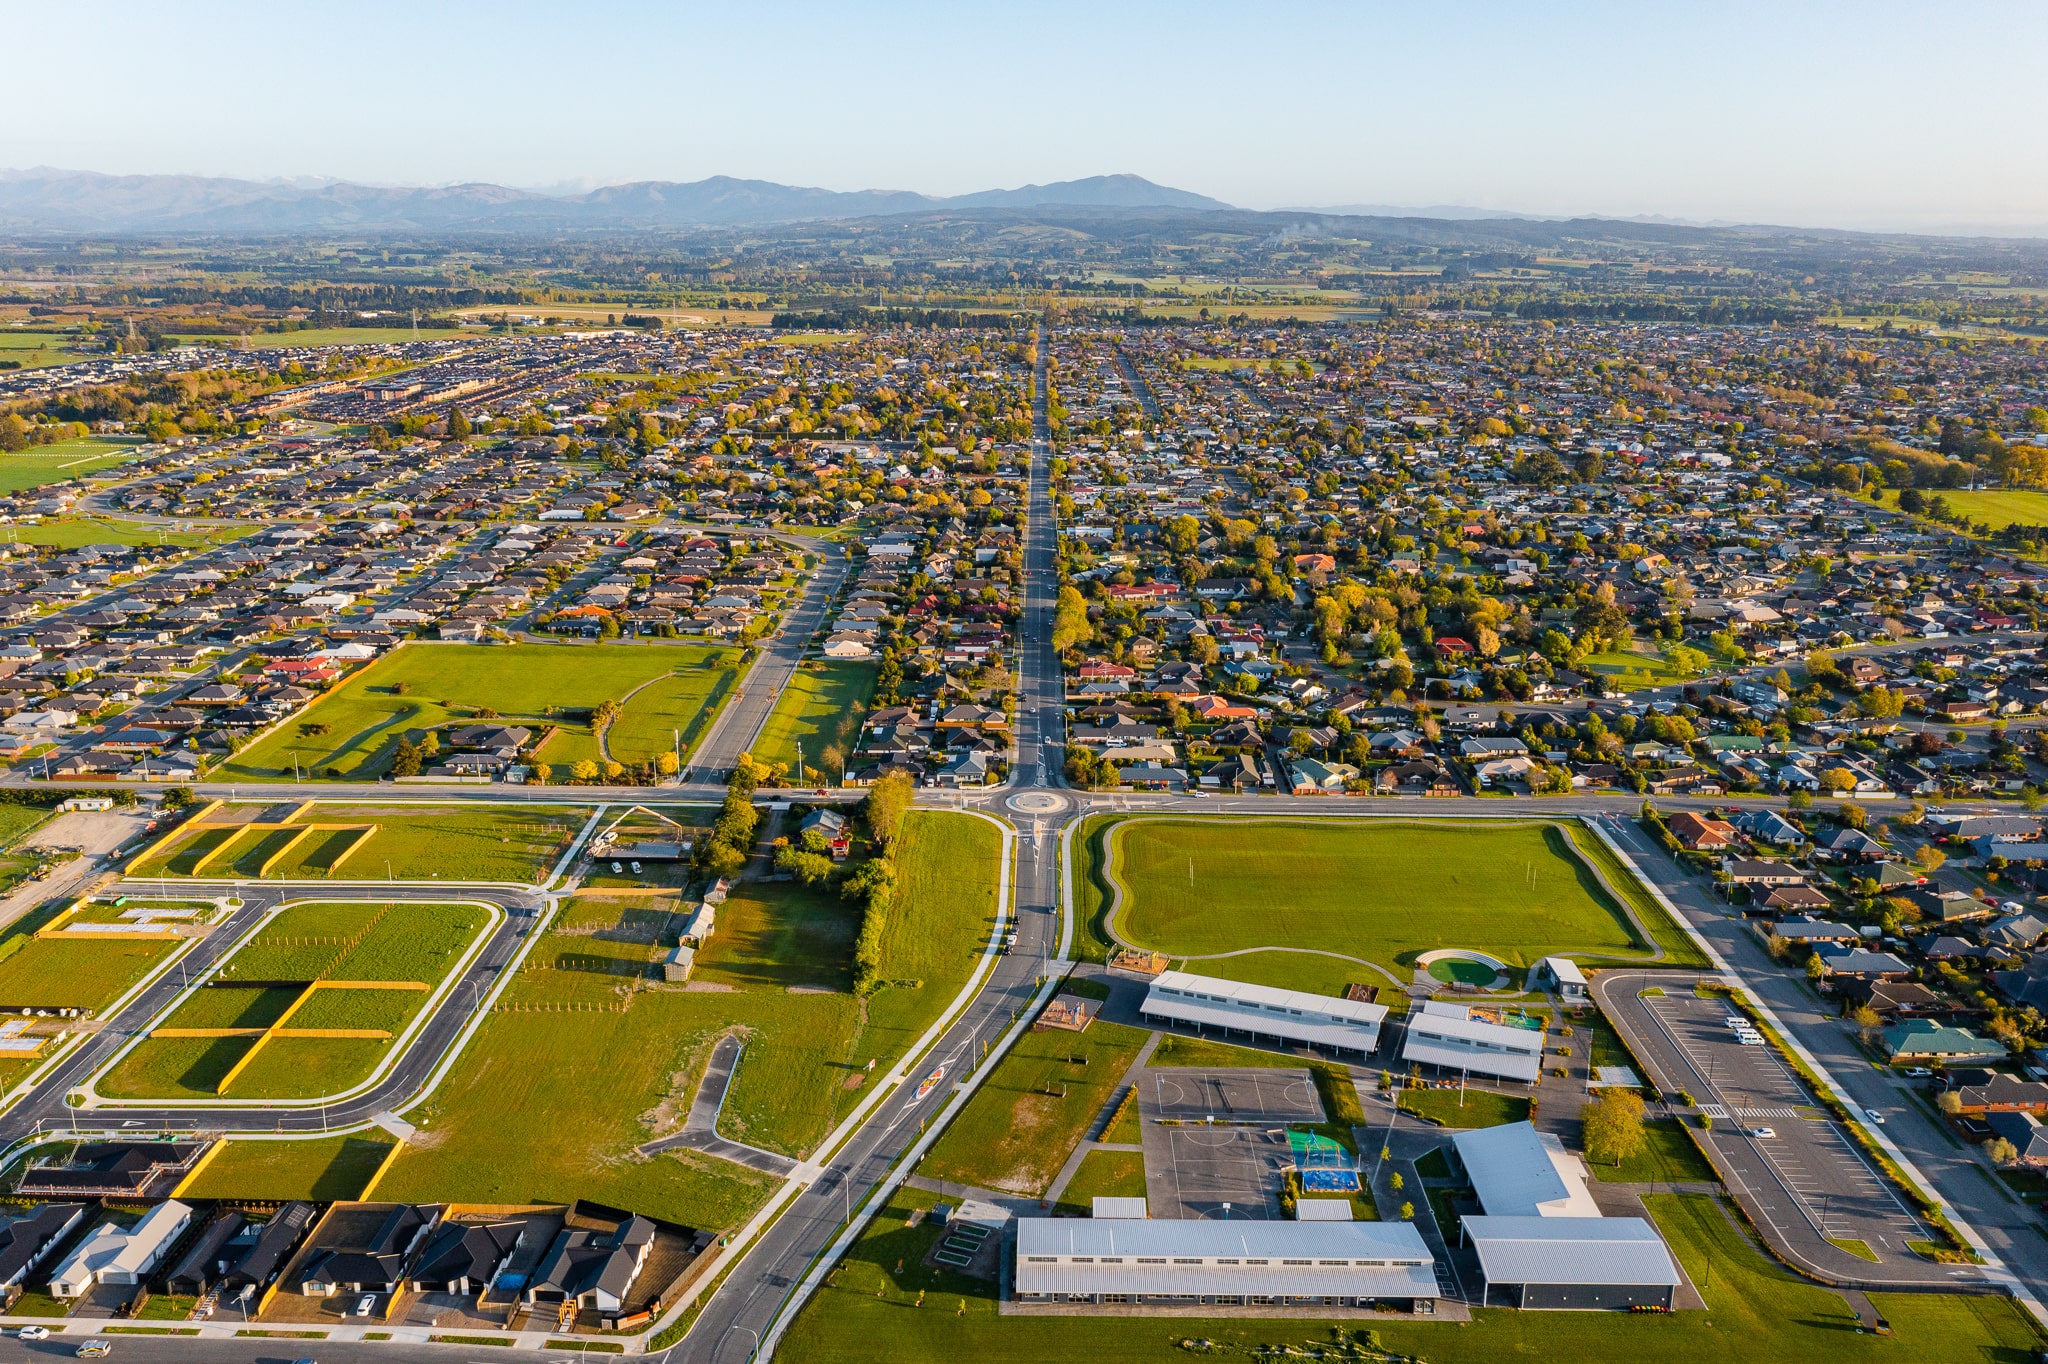 A township view of the new builds in Rangiora, North Canterbury completed by Trendsetter Homes